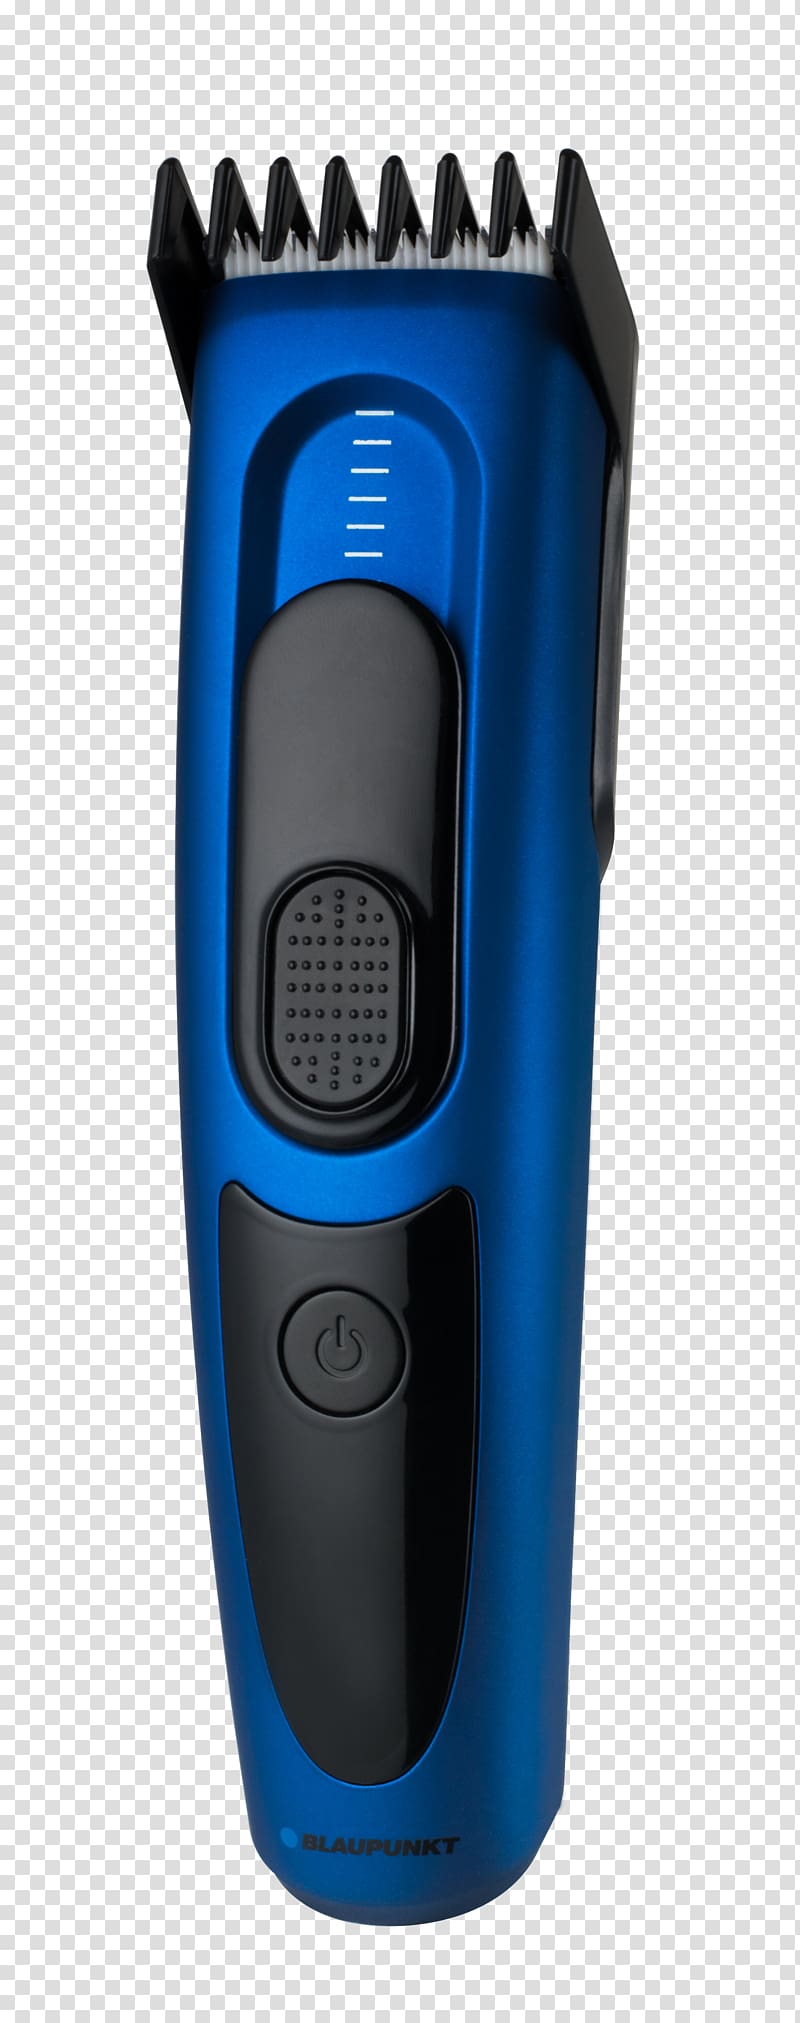 Hair clipper Blaupunkt Electric Razors & Hair Trimmers Hyundai Motor Company Remington BHT2000A, Supplies On The Side transparent background PNG clipart